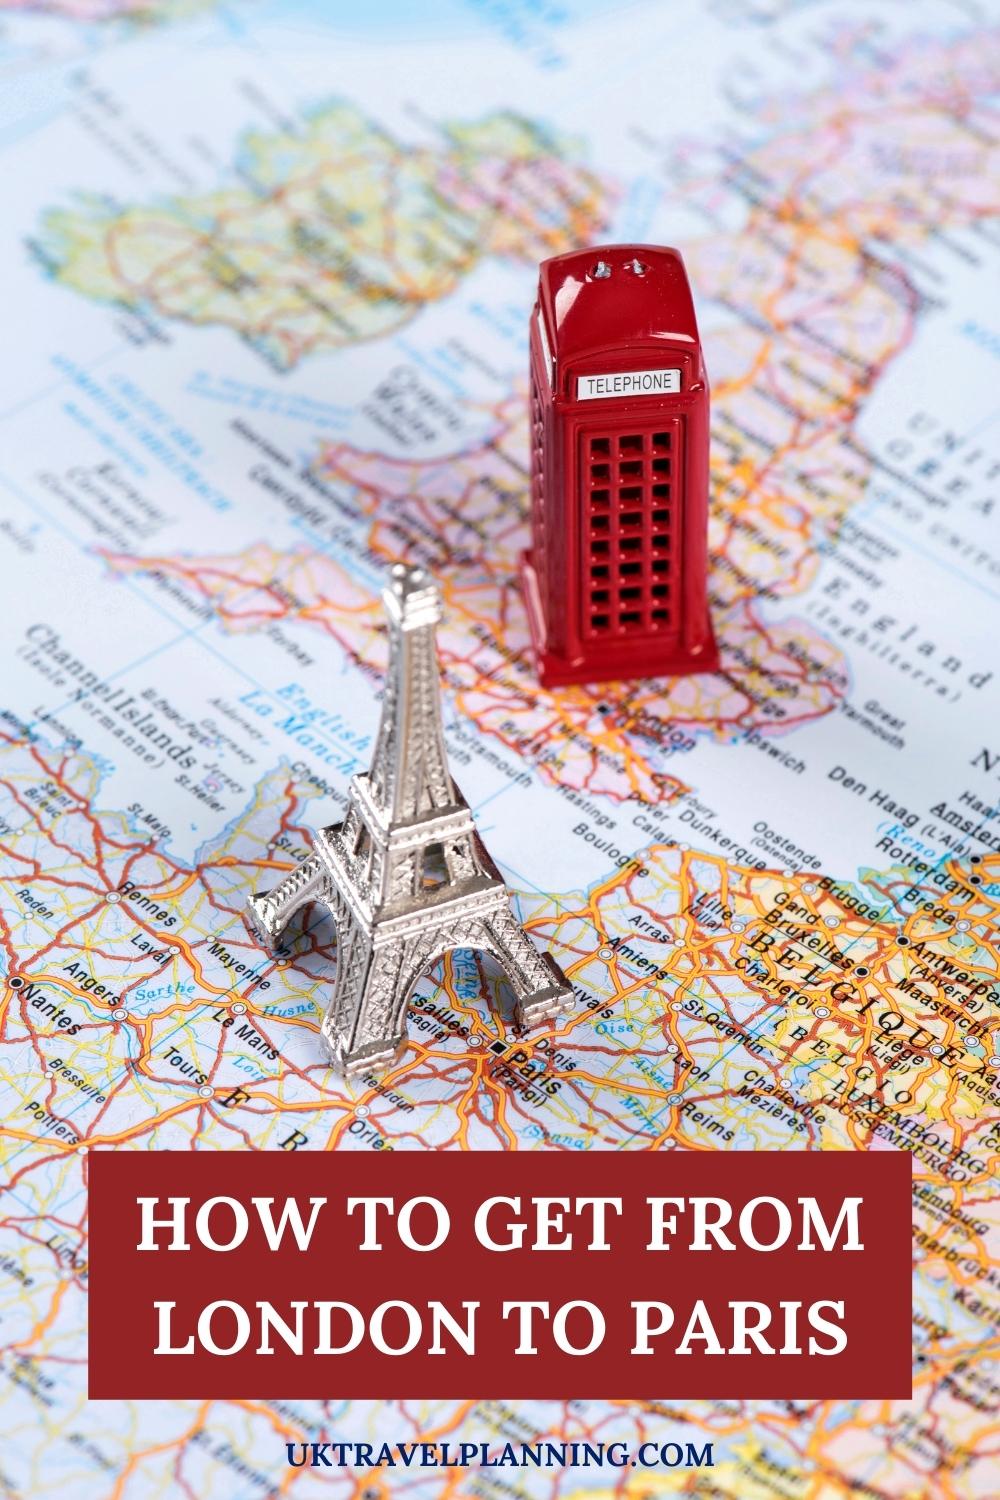 How to get from London to Paris Complete Guide to 5 Options